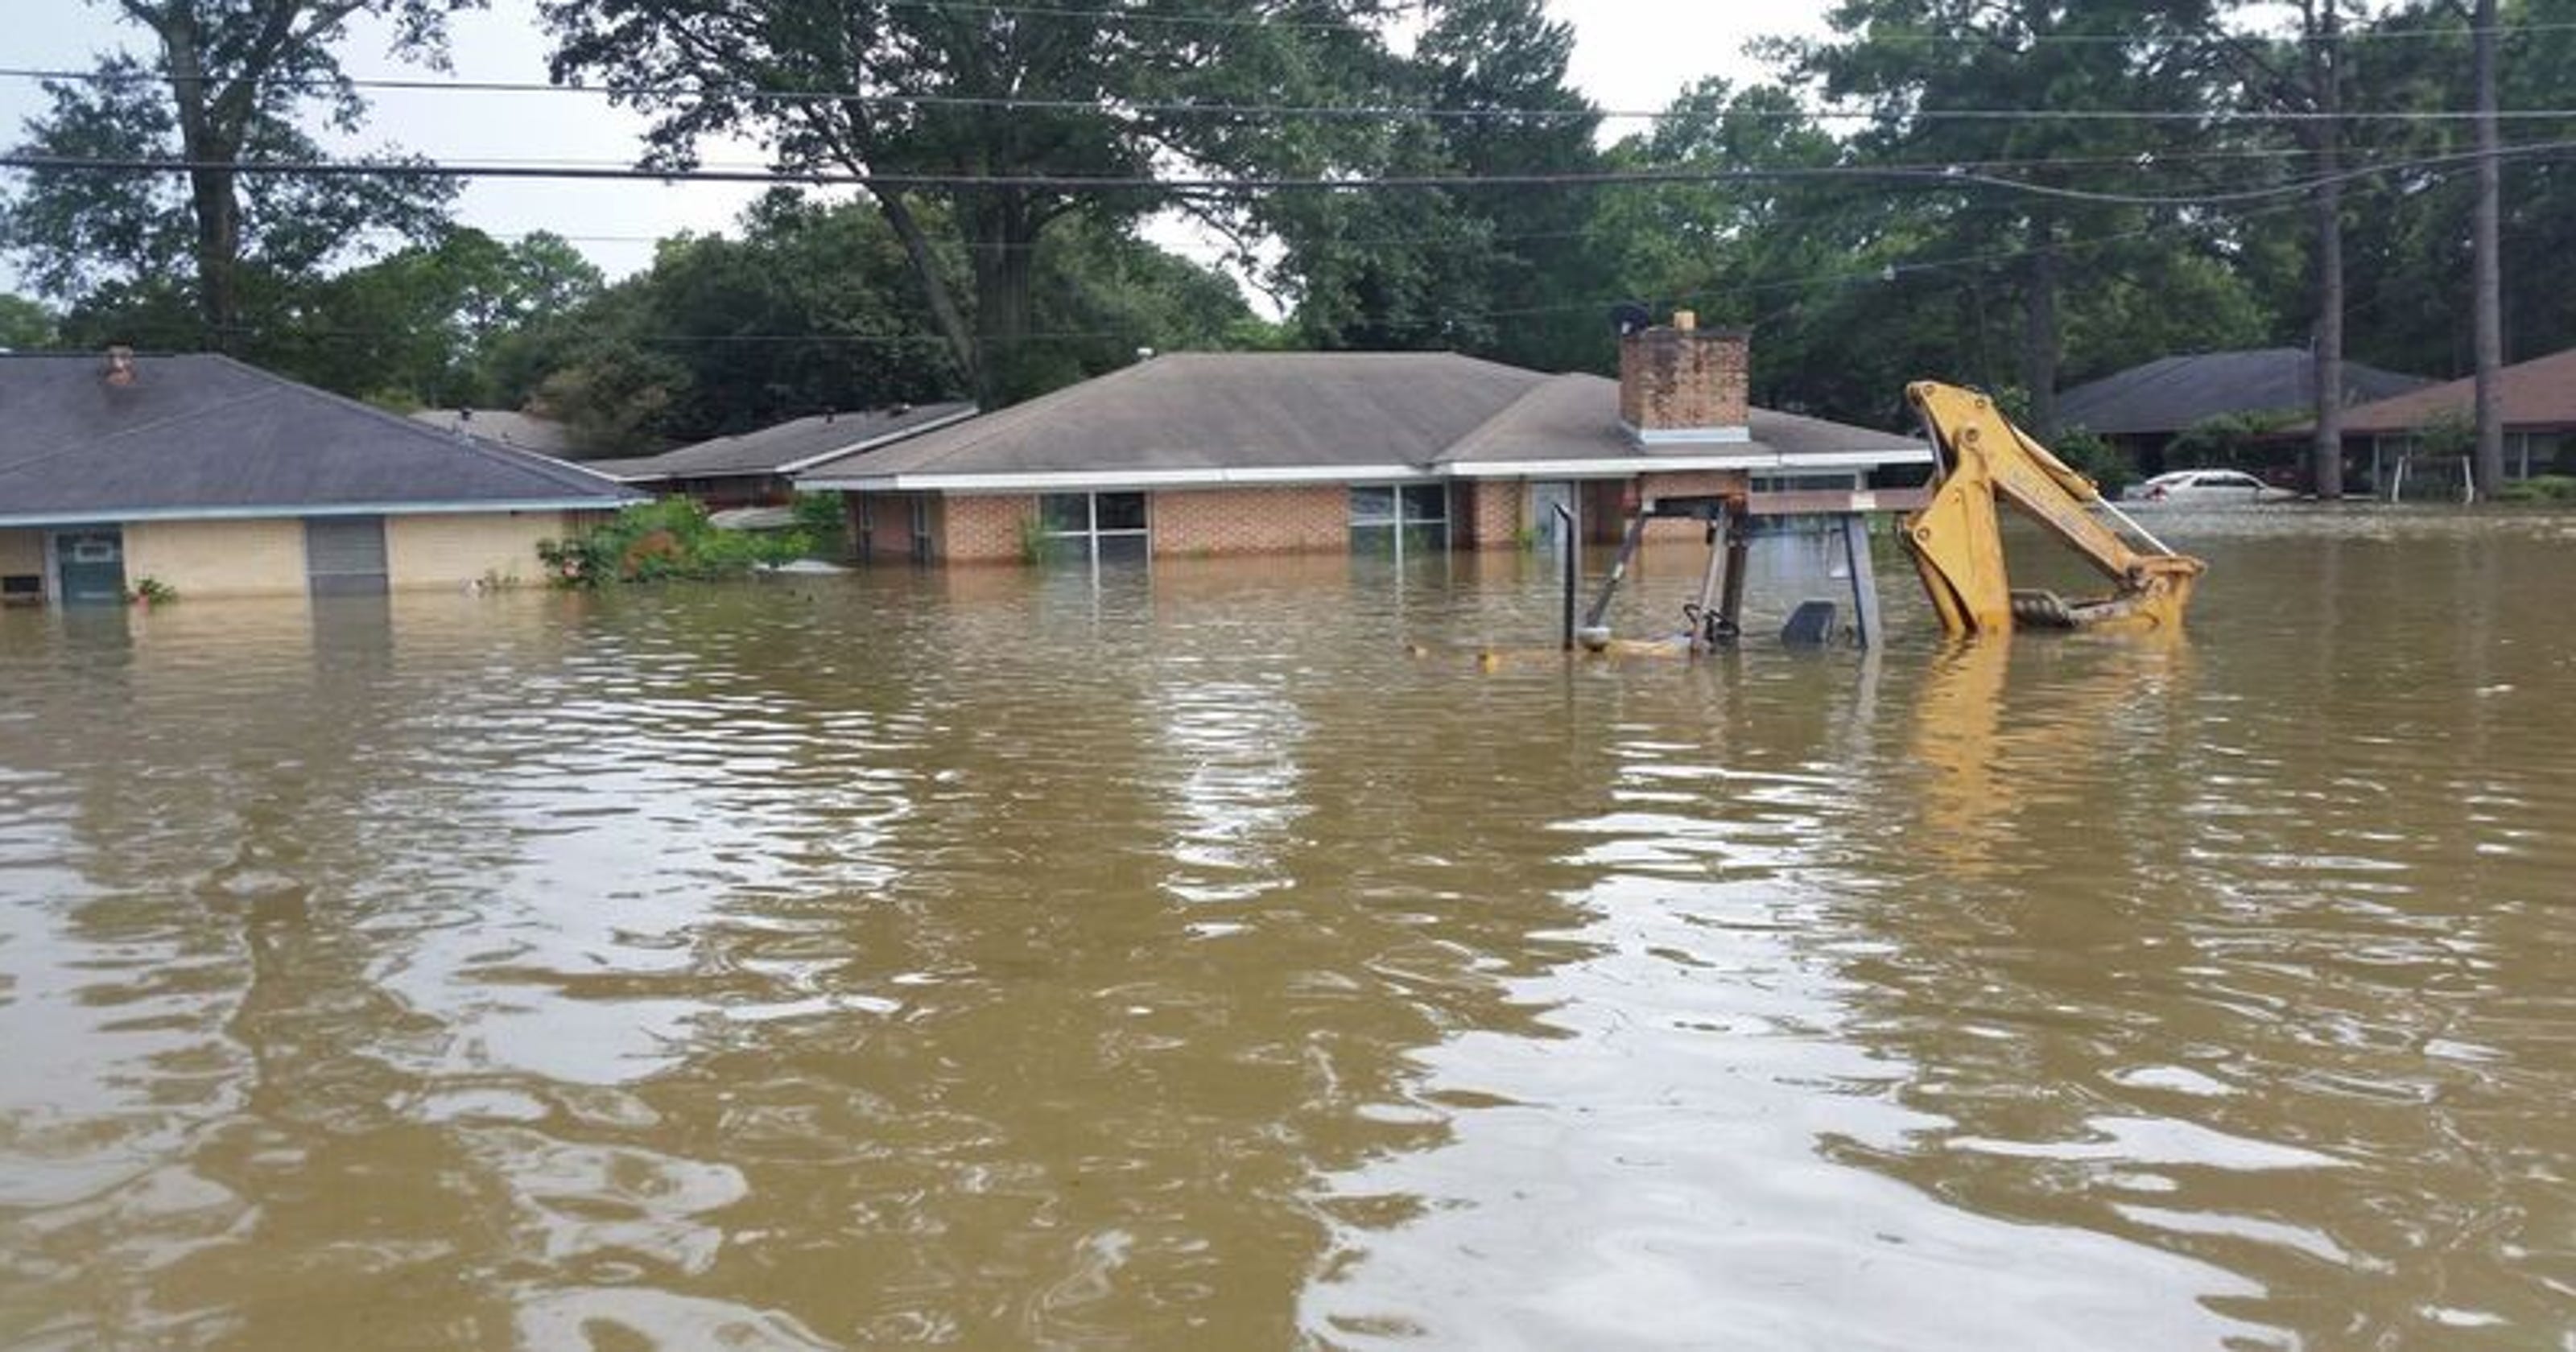 Thousands displaced, seeking disaster relief in recent flooding